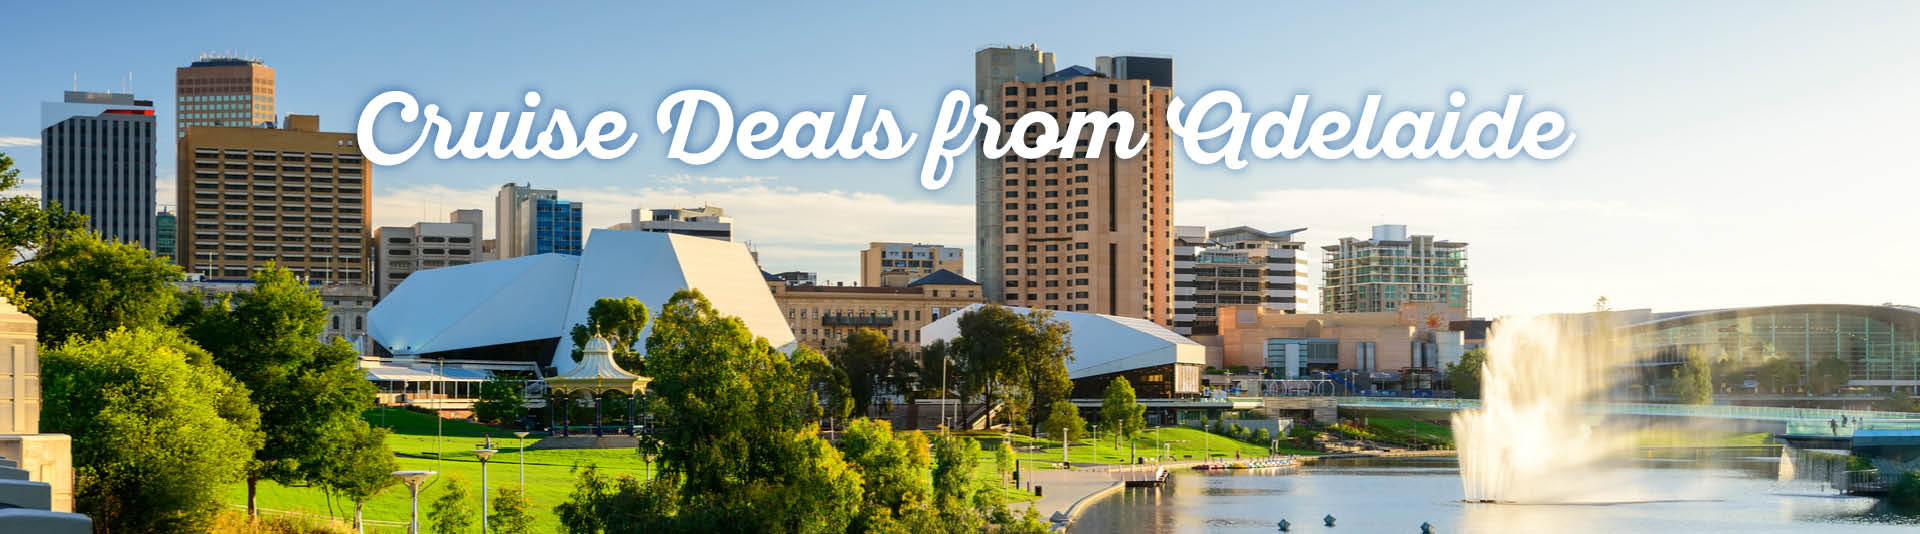 cruise-deals-from-adelaide-1.jpg